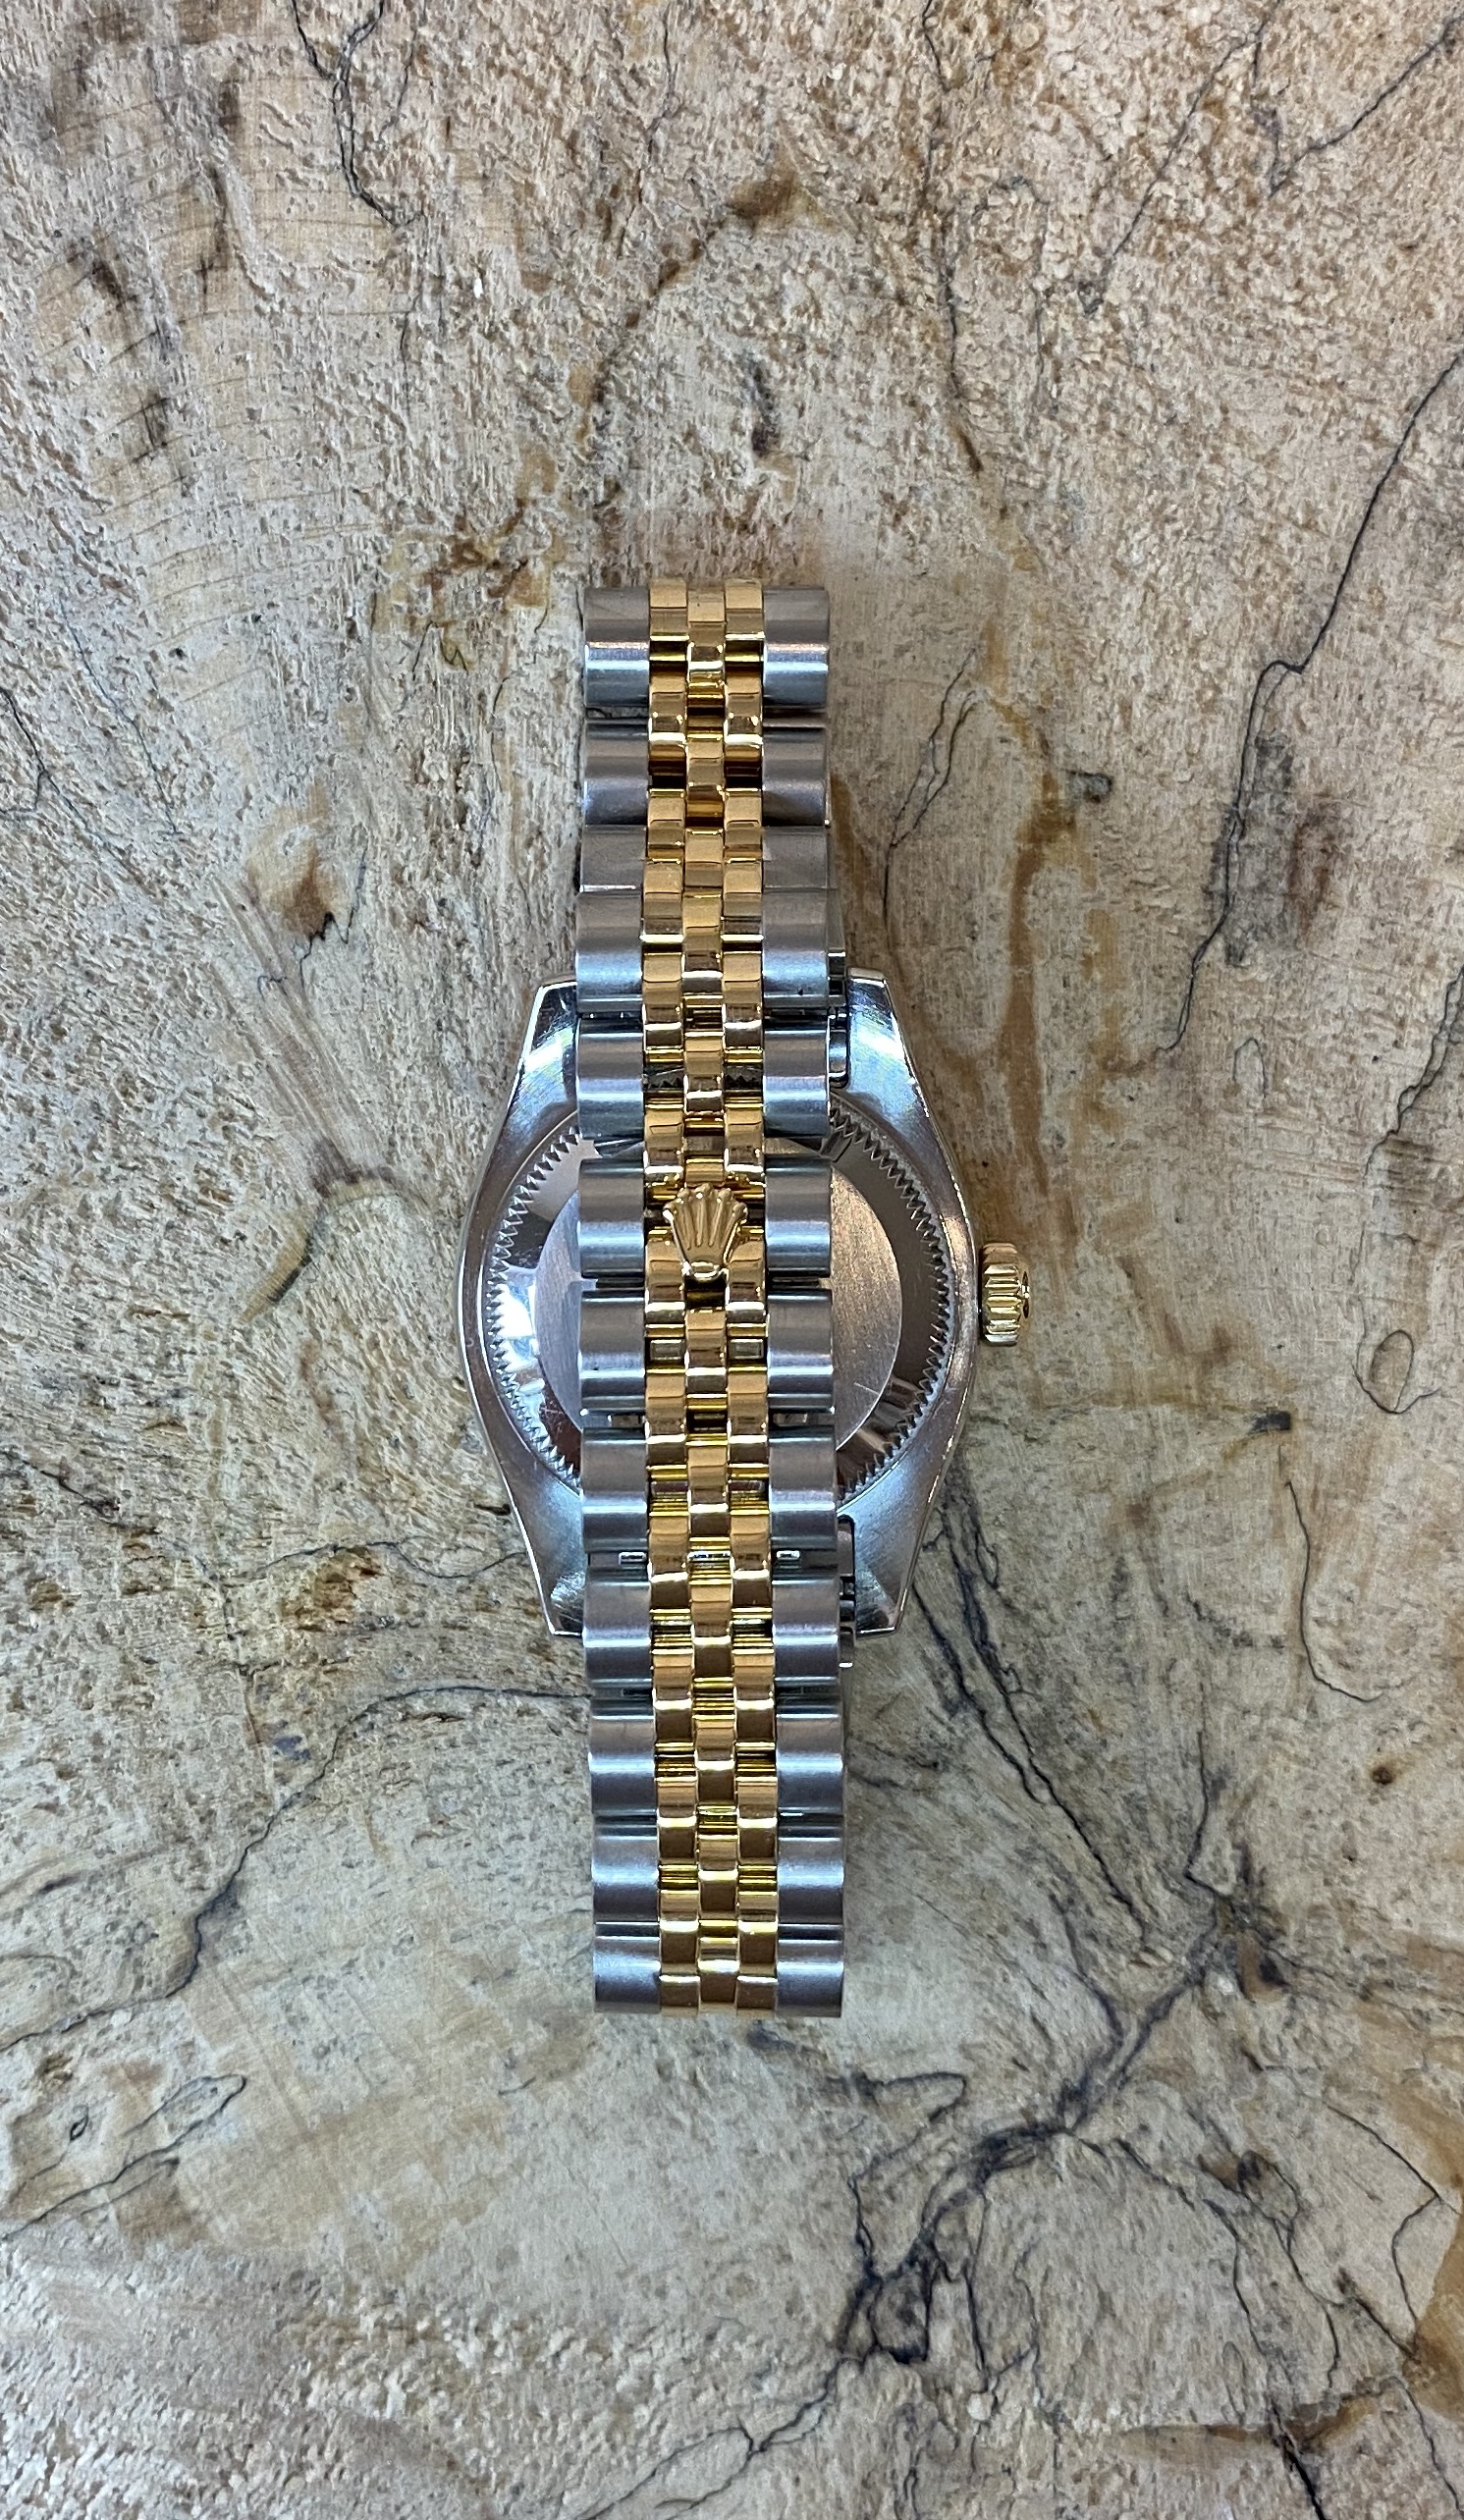 Ladies Rolex Datejust 179173 18k Gold & Stainless Steel *Factory Diamond Dial *Hardly Worn From New - Image 7 of 13